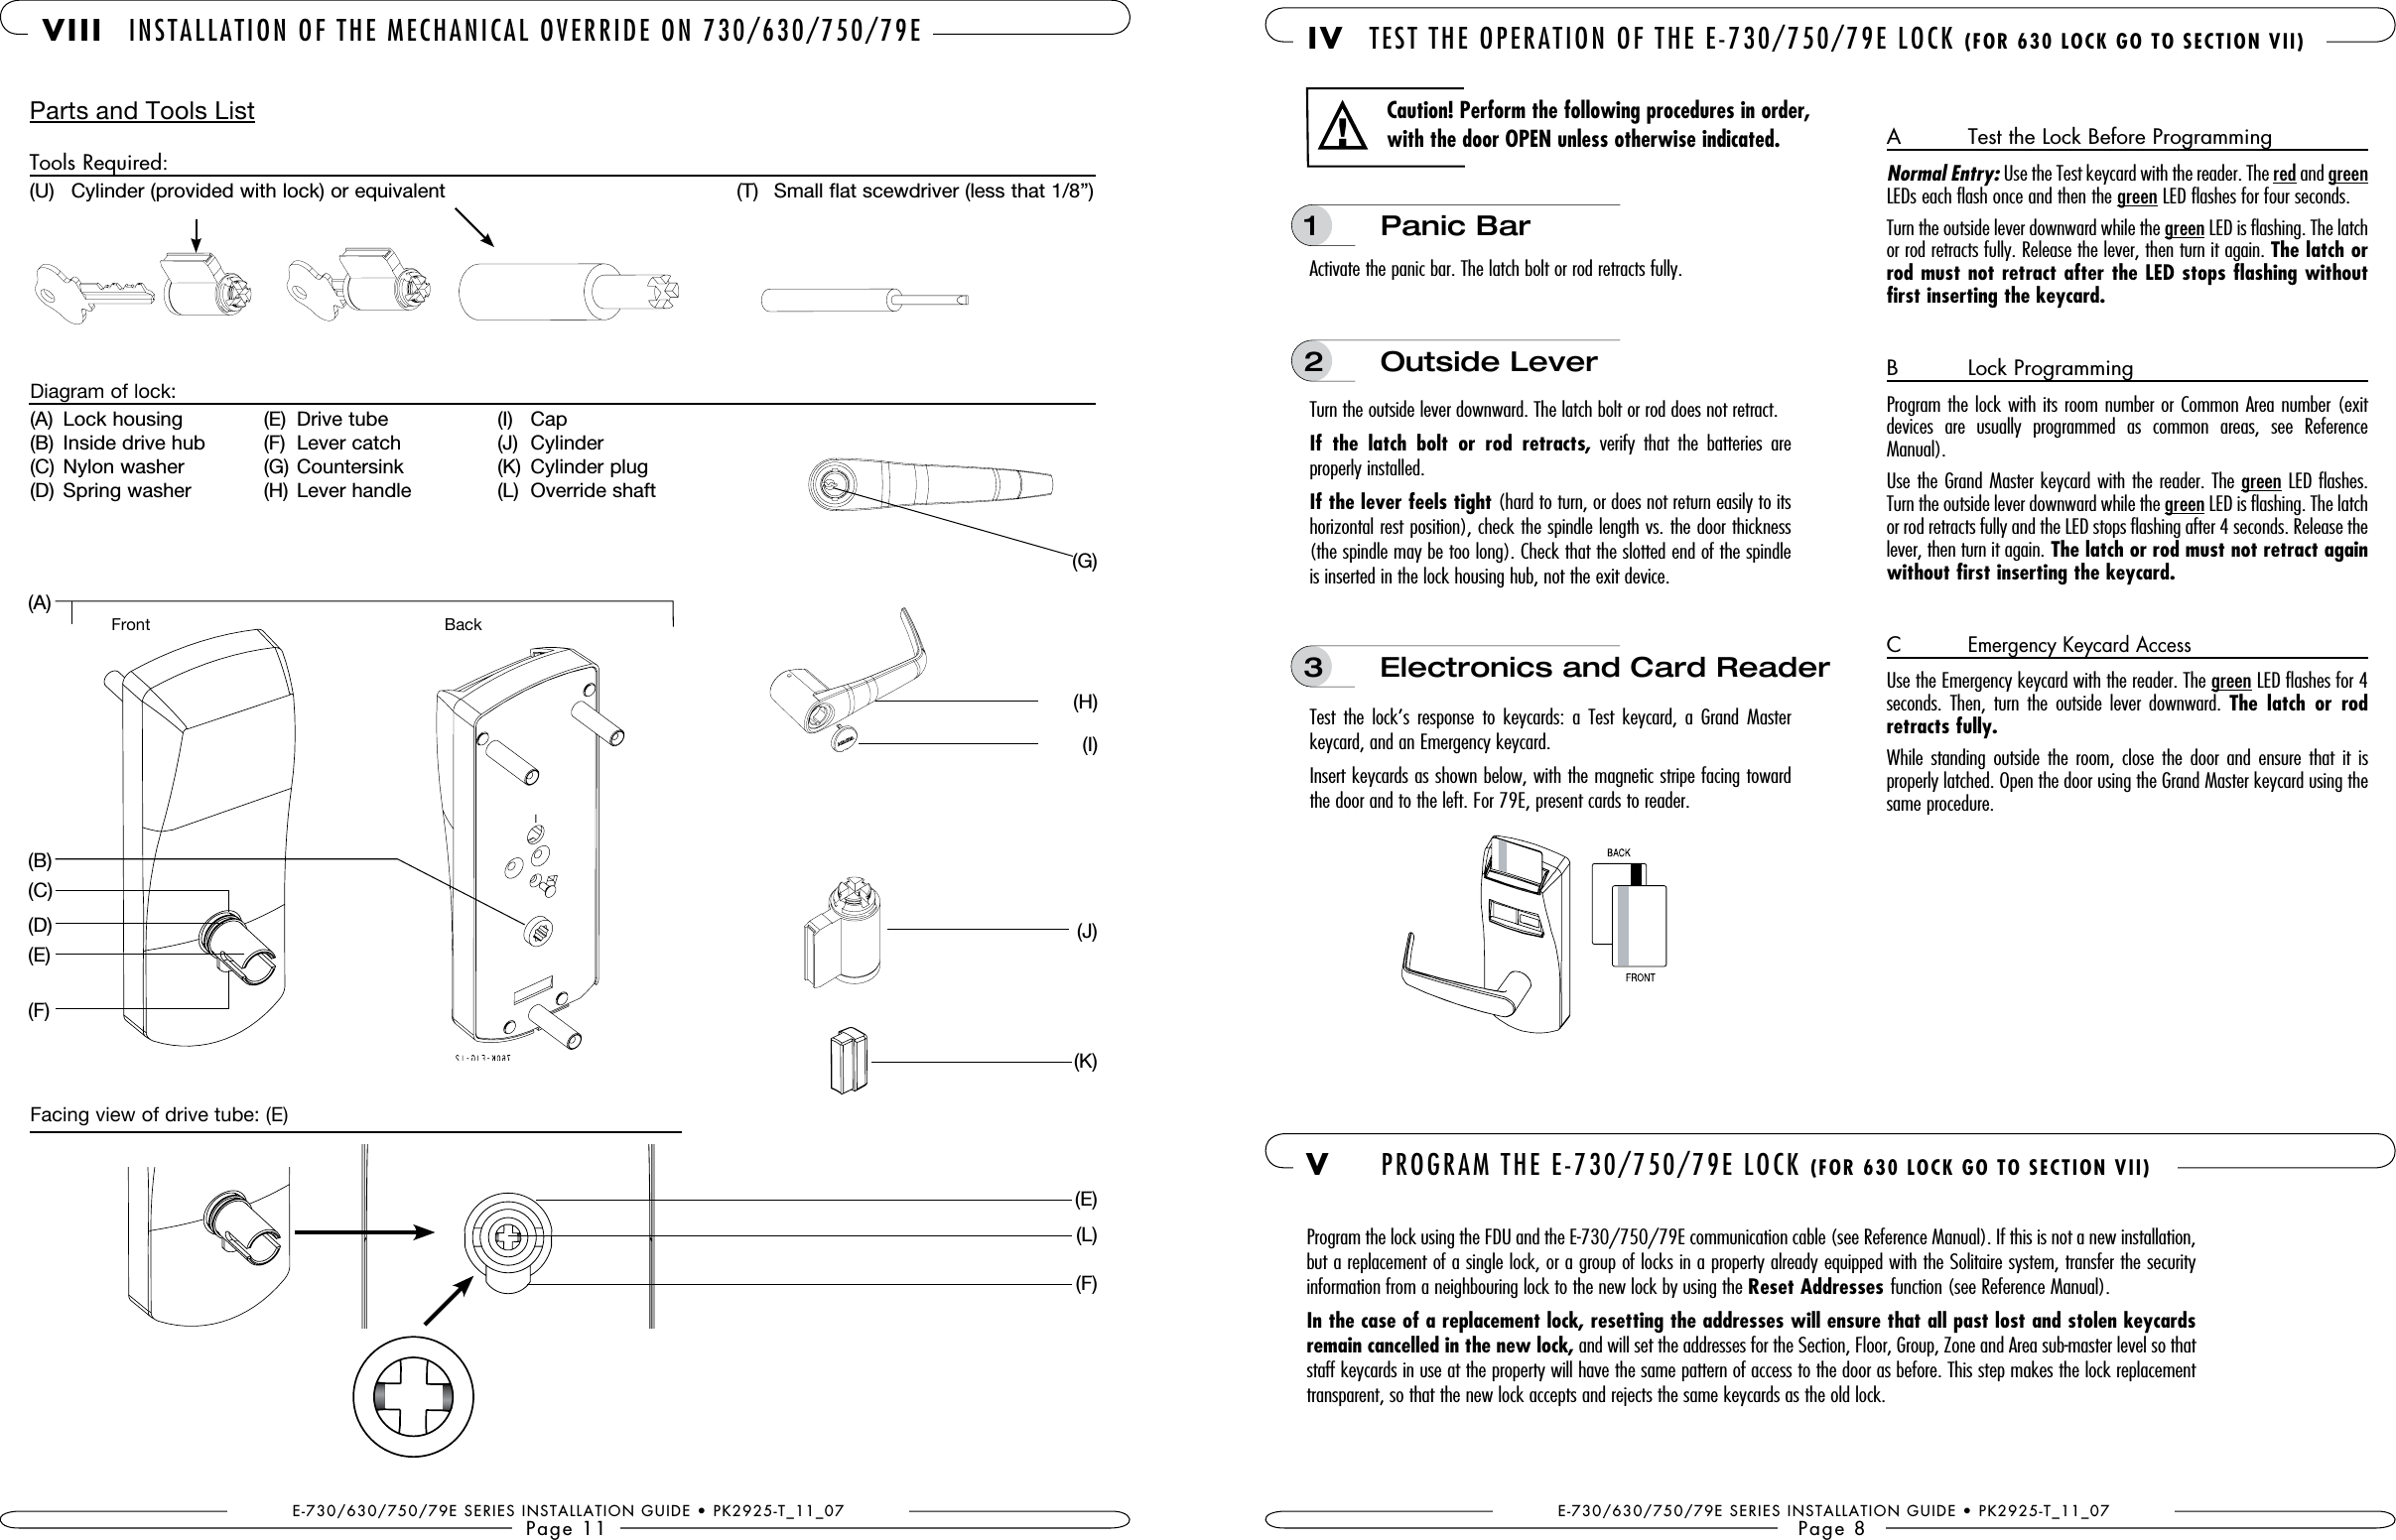 E-730/630/750/79E SERIES INSTALLATION GUIDE • PK2925-T_11_07Page 11 VIII INSTALLATION OF THE MECHANICAL OVERRIDE ON 730/630/750/79EParts and Tools ListTools Required:(U)  Cylinder (provided with lock) or equivalent    (T)  Small flat scewdriver (less that 1/8”)(A)  Lock housing(B)  Inside drive hub(C)  Nylon washer(D)  Spring washer(E)  Drive tube(F)  Lever catch(G)  Countersink (H)  Lever handle(I)   Cap(J)  Cylinder (K)  Cylinder plug (L)  Override shaftDiagram of lock:Facing view of drive tube: (E)Back(A)(H)(E)(B)(D)(F)(I)(J)(K)(E)(L)(F)(G)(C)E-730/630/750/79E SERIES INSTALLATION GUIDE • PK2925-T_11_07Page 8 IV TEST THE OPERATION OF THE E-730/750/79E LOCK Activate the panic bar. The latch bolt or rod retracts fully. Turn the outside lever downward. The latch bolt or rod does not retract.If  the  latch  bolt  or  rod  retracts,  verify  that  the  batteries  are properly installed.If the lever feels tight (hard to turn, or does not return easily to its horizontal rest position), check the spindle length vs. the door thickness (the spindle may be too long). Check that the slotted end of the spindle is inserted in the lock housing hub, not the exit device.Test  the  lock’s  response  to  keycards:  a  Test  keycard,  a  Grand  Master keycard, and an Emergency keycard. Insert keycards as shown below, with the magnetic stripe facing toward the door and to the left. For 79E, present cards to reader.1  Panic Bar2  Outside LeverA   Test the Lock Before ProgrammingNormal Entry: Use the Test keycard with the reader. The red and green LEDs each flash once and then the green LED flashes for four seconds. Turn the outside lever downward while the green LED is flashing. The latch or rod retracts fully. Release the lever, then turn it again. The latch or first inserting the keycard.B   Lock ProgrammingProgram the lock with its room number or Common Area number (exit devices  are  usually  programmed  as  common  areas,  see  Reference Manual).Use the Grand Master keycard with the reader. The green LED flashes. Turn the outside lever downward while the green LED is flashing. The latch or rod retracts fully and the LED stops flashing after 4 seconds. Release the lever, then turn it again. The latch or rod must not retract again without first inserting the keycard.C   Emergency Keycard AccessUse the Emergency keycard with the reader. The green LED flashes for 4  seconds.  Then,  turn  the  outside  lever  downward.  The  latch  or  rod retracts fully.While  standing  outside the room, close  the  door  and  ensure  that  it is  properly latched. Open the door using the Grand Master keycard using the same procedure.Caution! Perform the following procedures in order, with the door OPEN unless otherwise indicated.!3  Electronics and Card Reader V  PROGRAM THE E-730/750/79E LOCK Program the lock using the FDU and the E-730/750/79E communication cable (see Reference Manual). If this is not a new installation, but a replacement of a single lock, or a group of locks in a property already equipped with the Solitaire system, transfer the security  information from a neighbouring lock to the new lock by using the Reset Addresses function (see Reference Manual). In the case of a replacement lock, resetting the addresses will ensure that all past lost and stolen keycards remain cancelled in the new lock, and will set the addresses for the Section, Floor, Group, Zone and Area sub-master level so that staff keycards in use at the property will have the same pattern of access to the door as before. This step makes the lock replacement transparent, so that the new lock accepts and rejects the same keycards as the old lock.Front